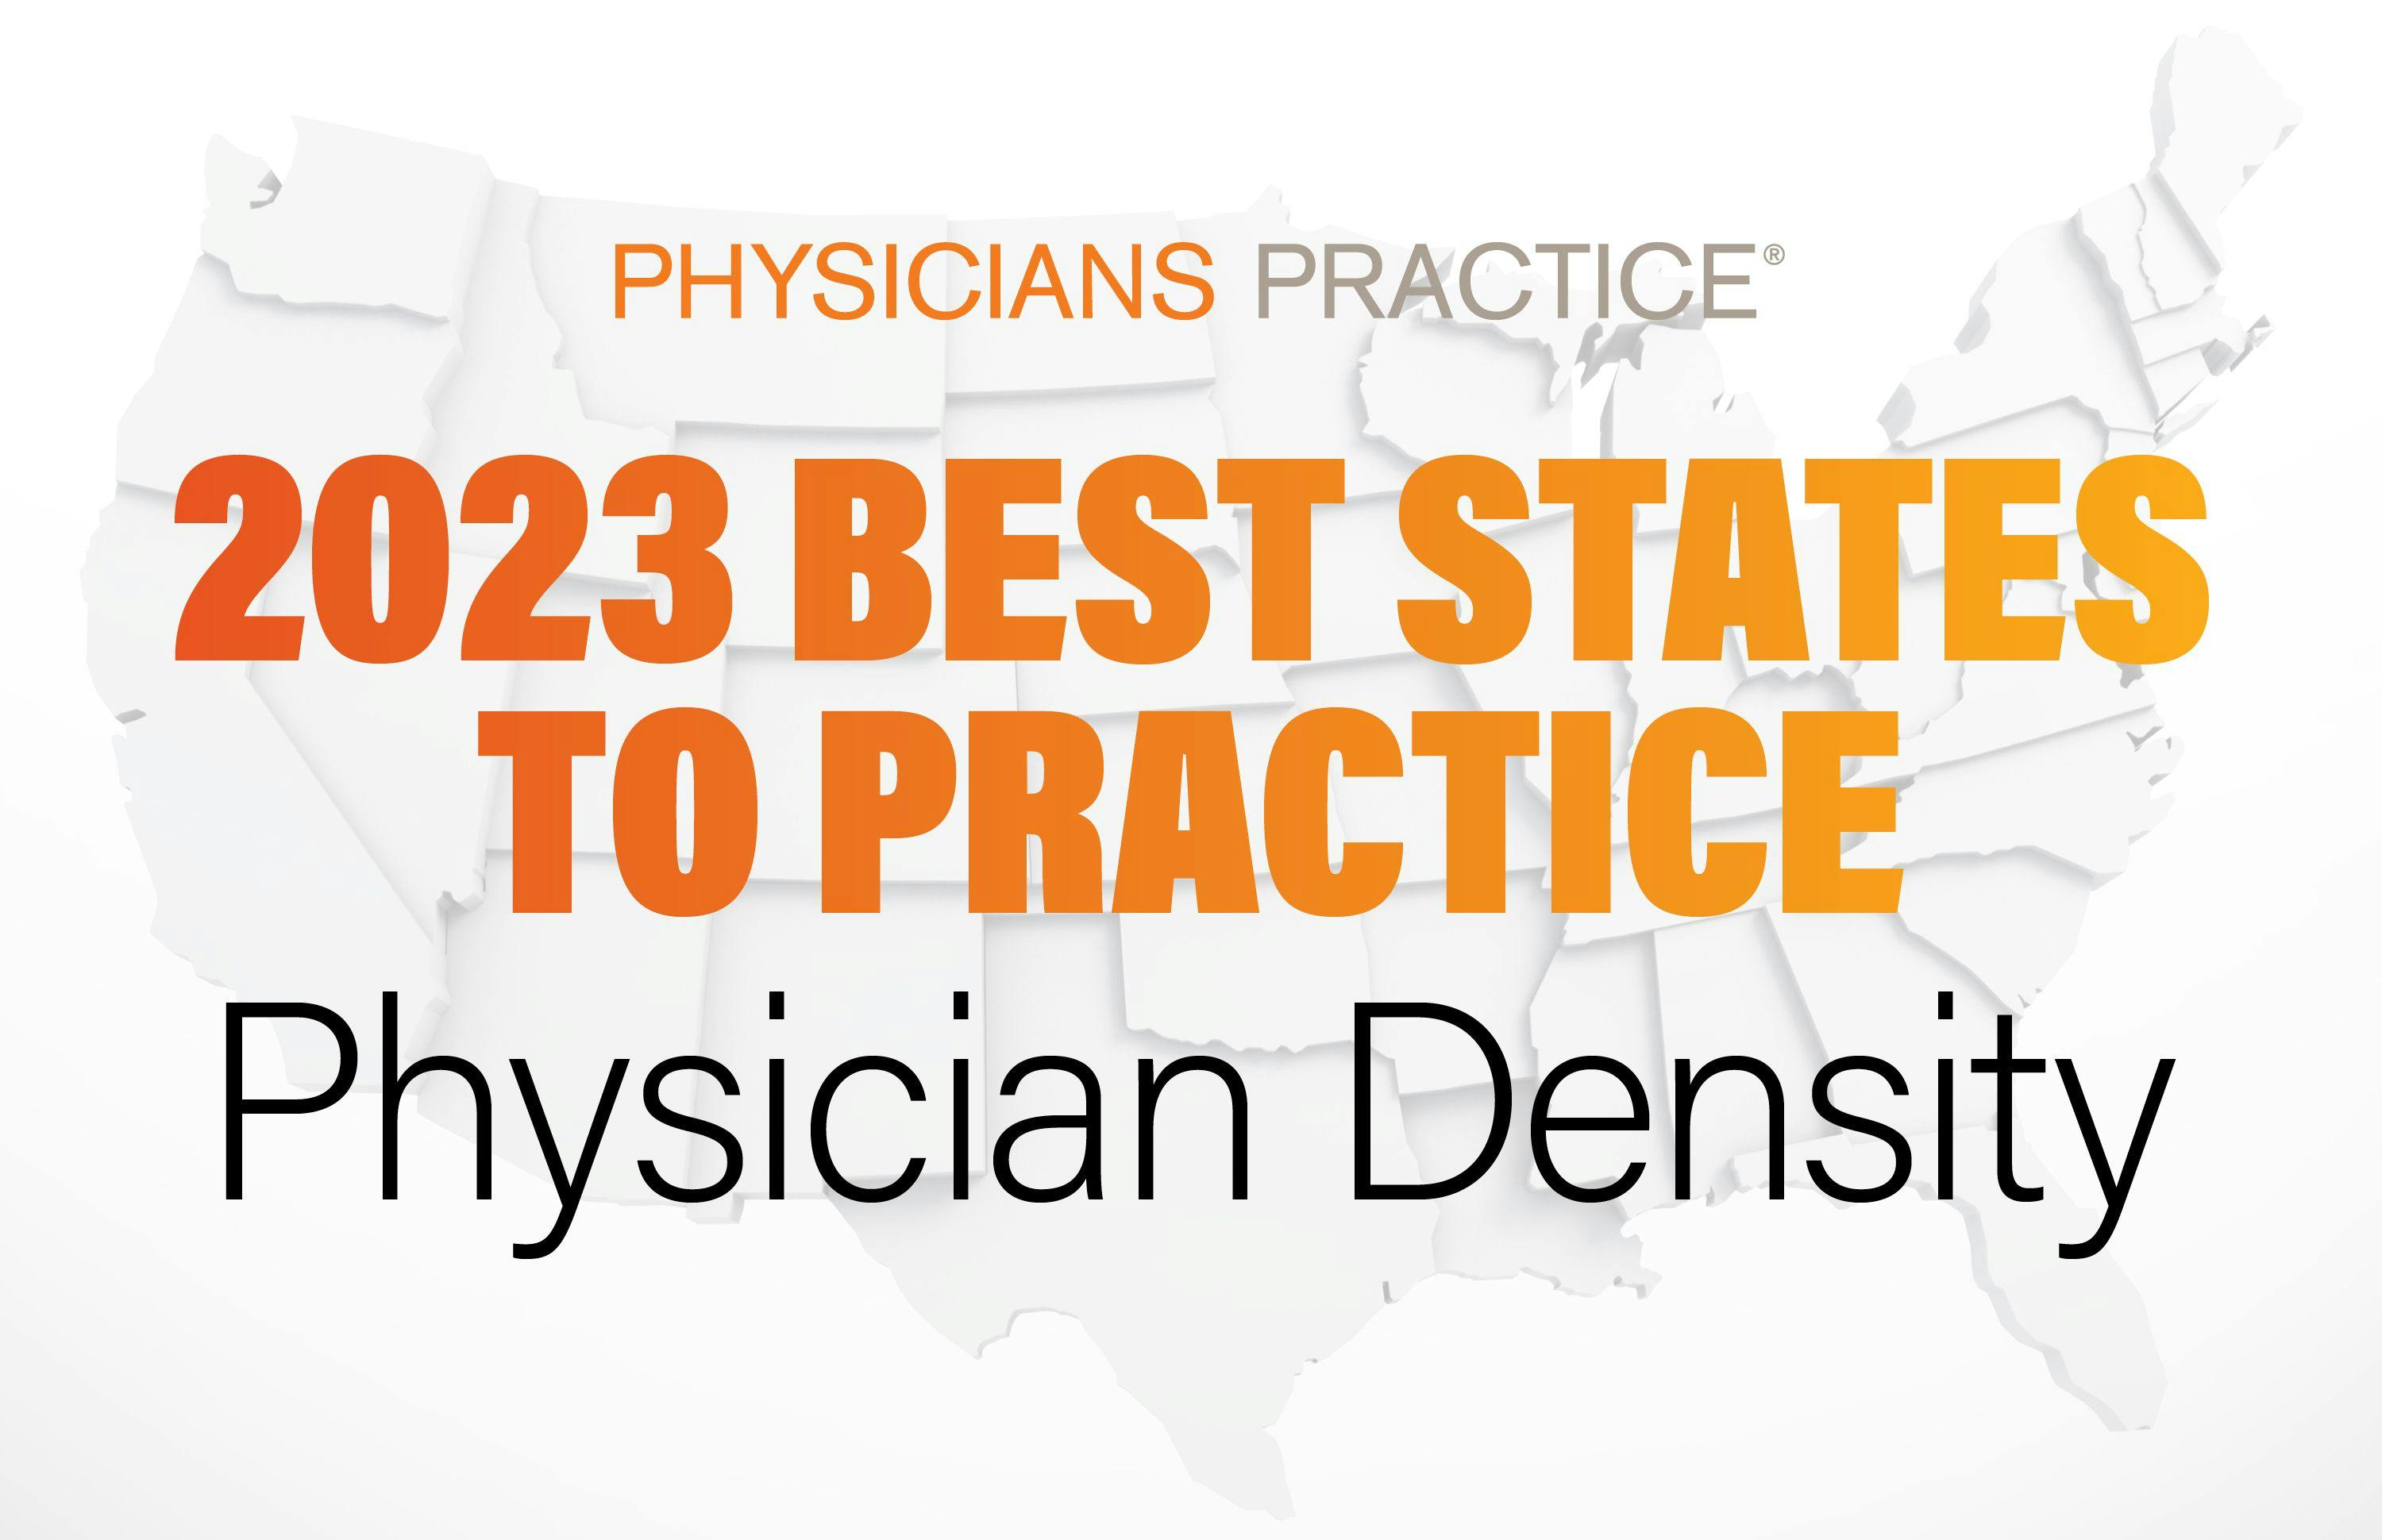 7 Best states to practice for physician density